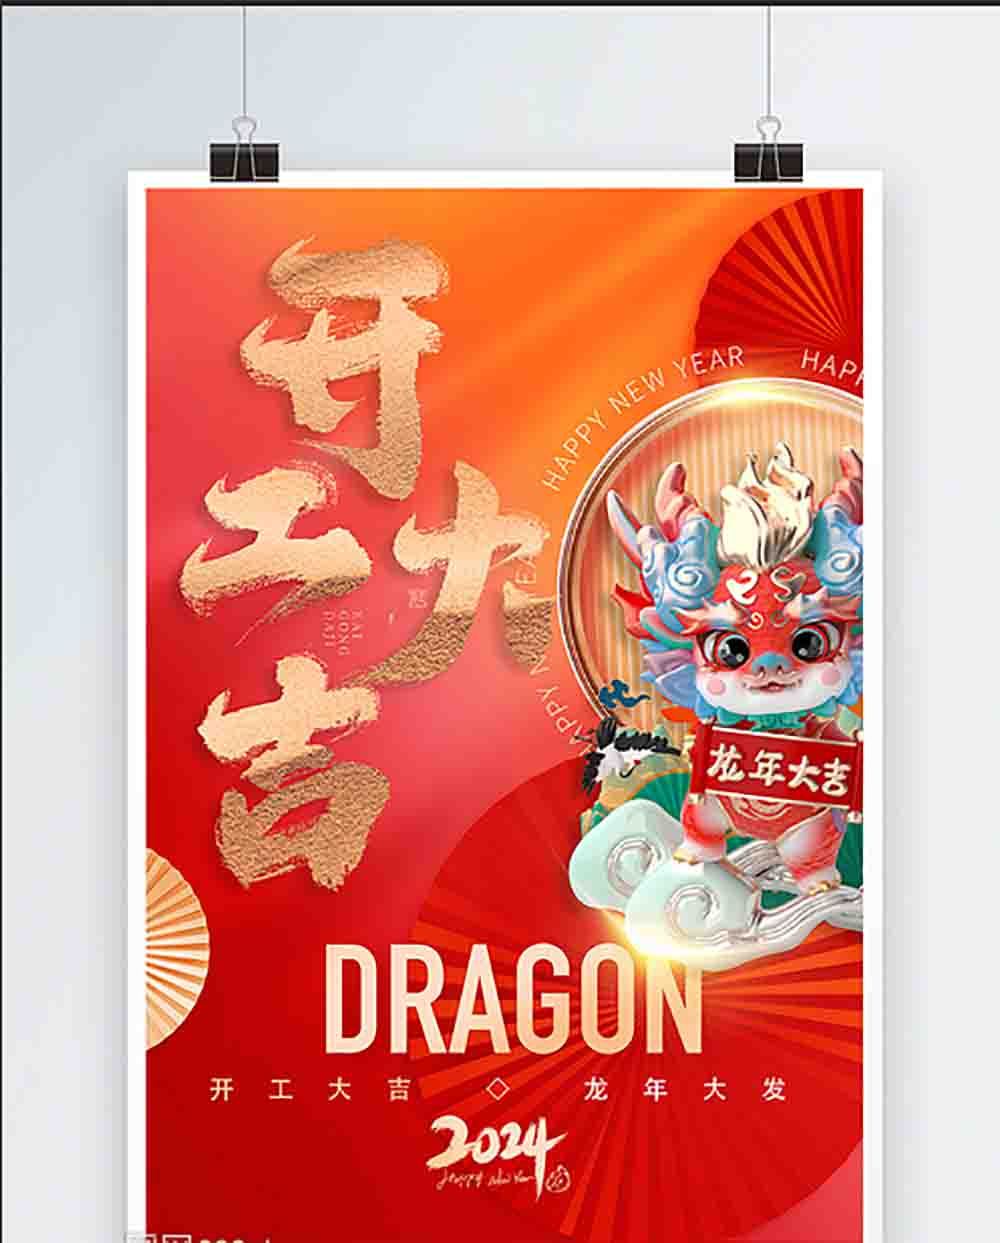 The year of the dragon starts